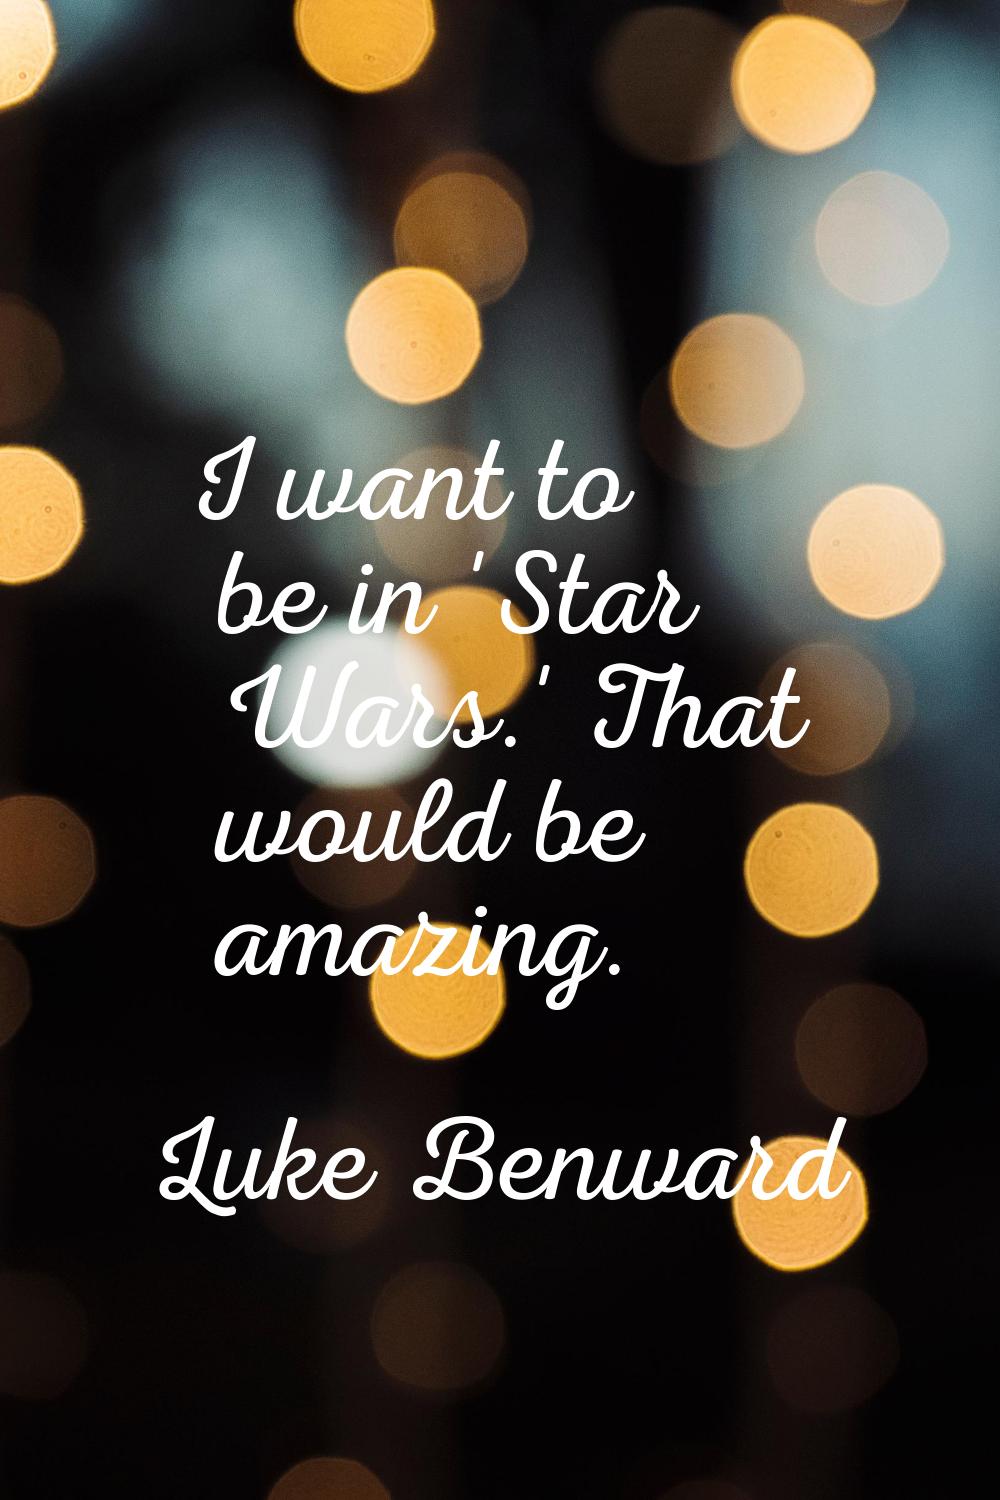 I want to be in 'Star Wars.' That would be amazing.